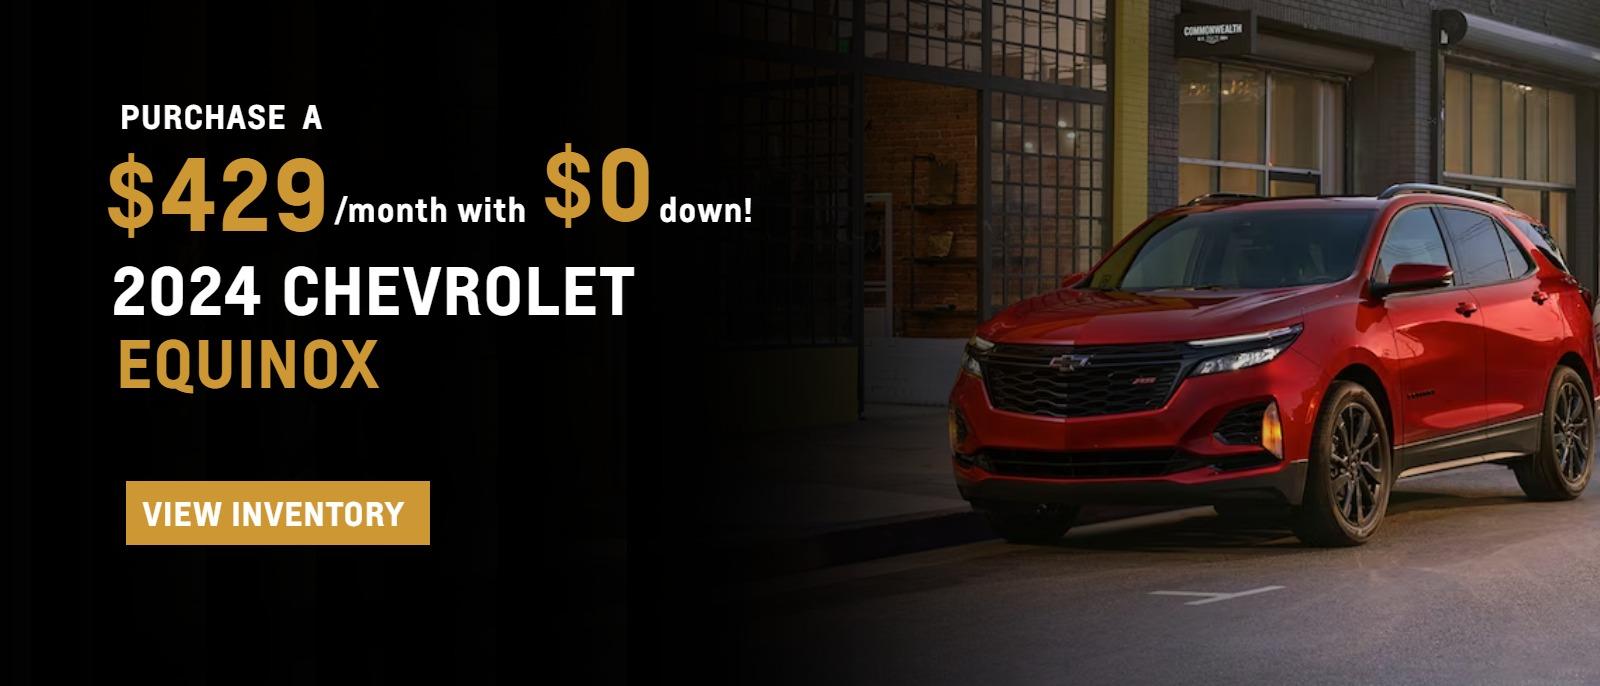 Purchase a 2024 Equinox for $429/month with $0 down!